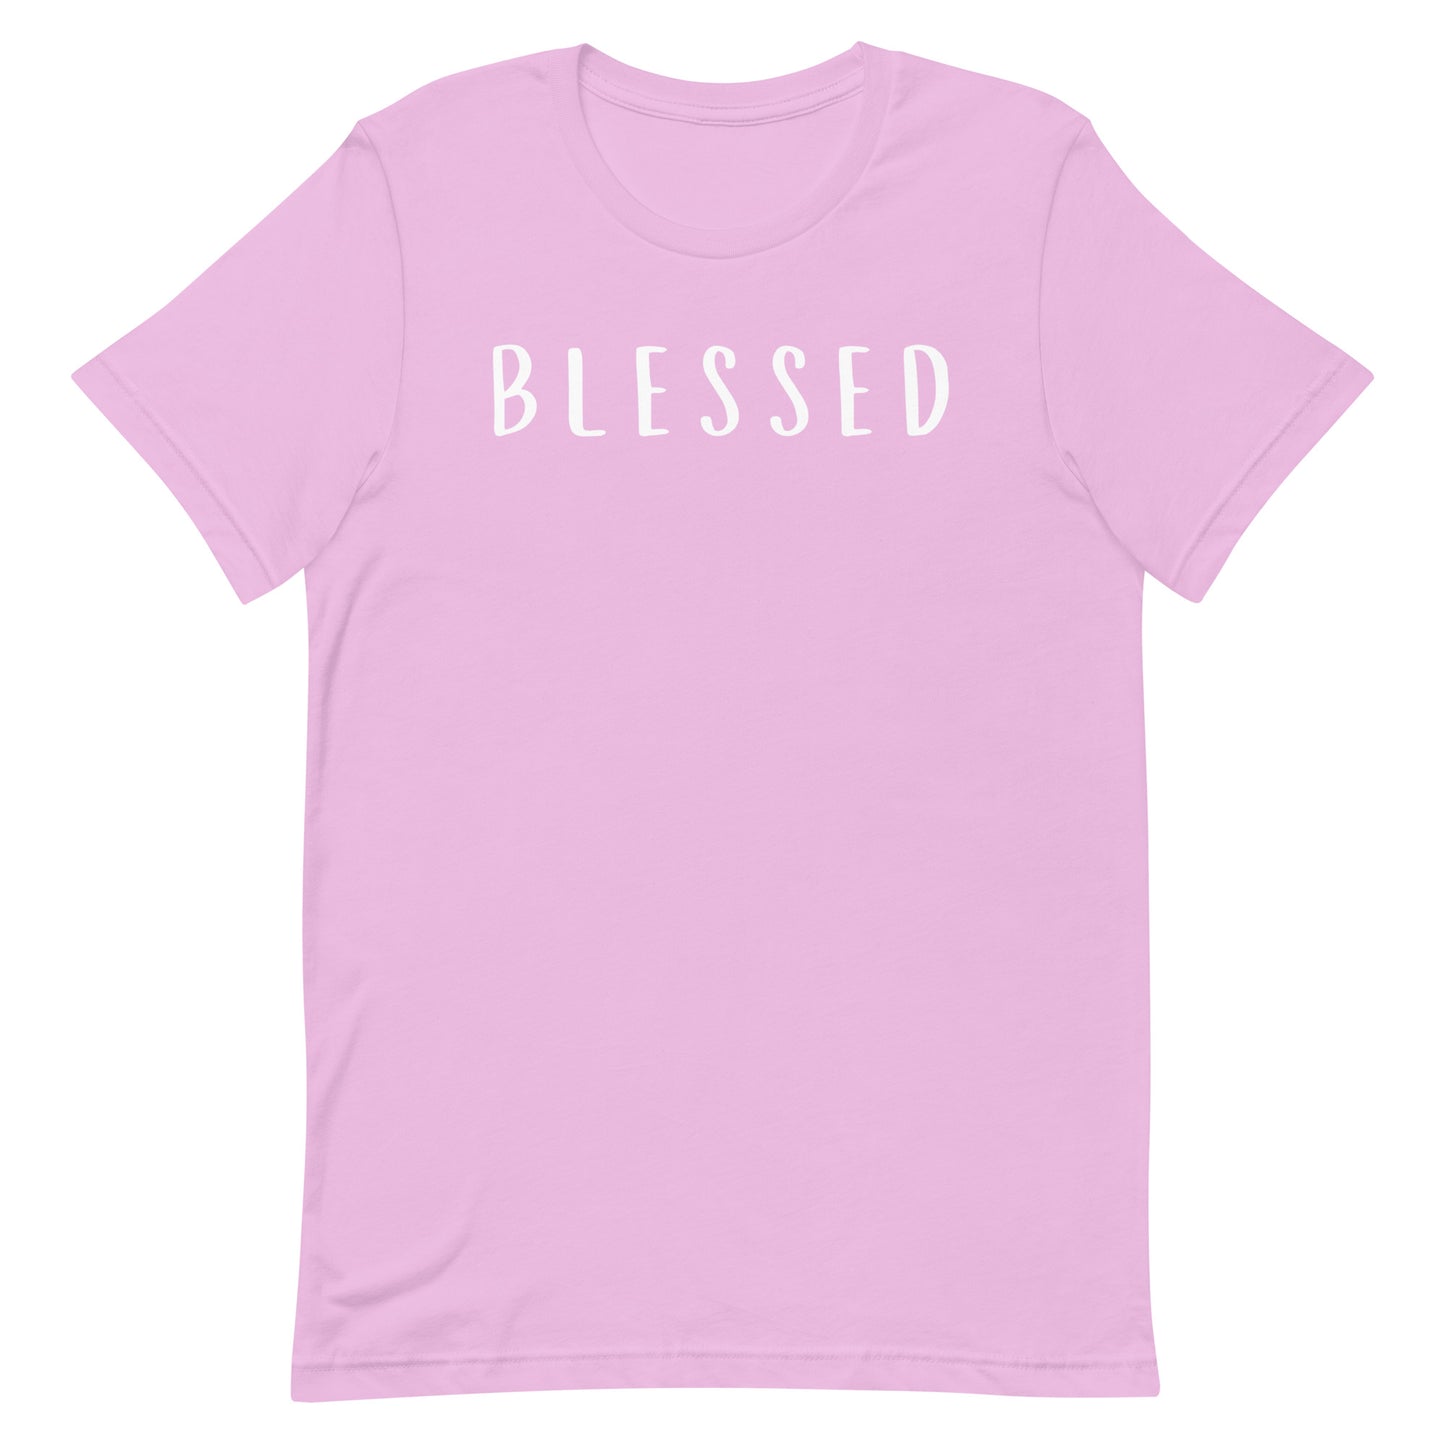 Blessed. Inspirational T-shirt.